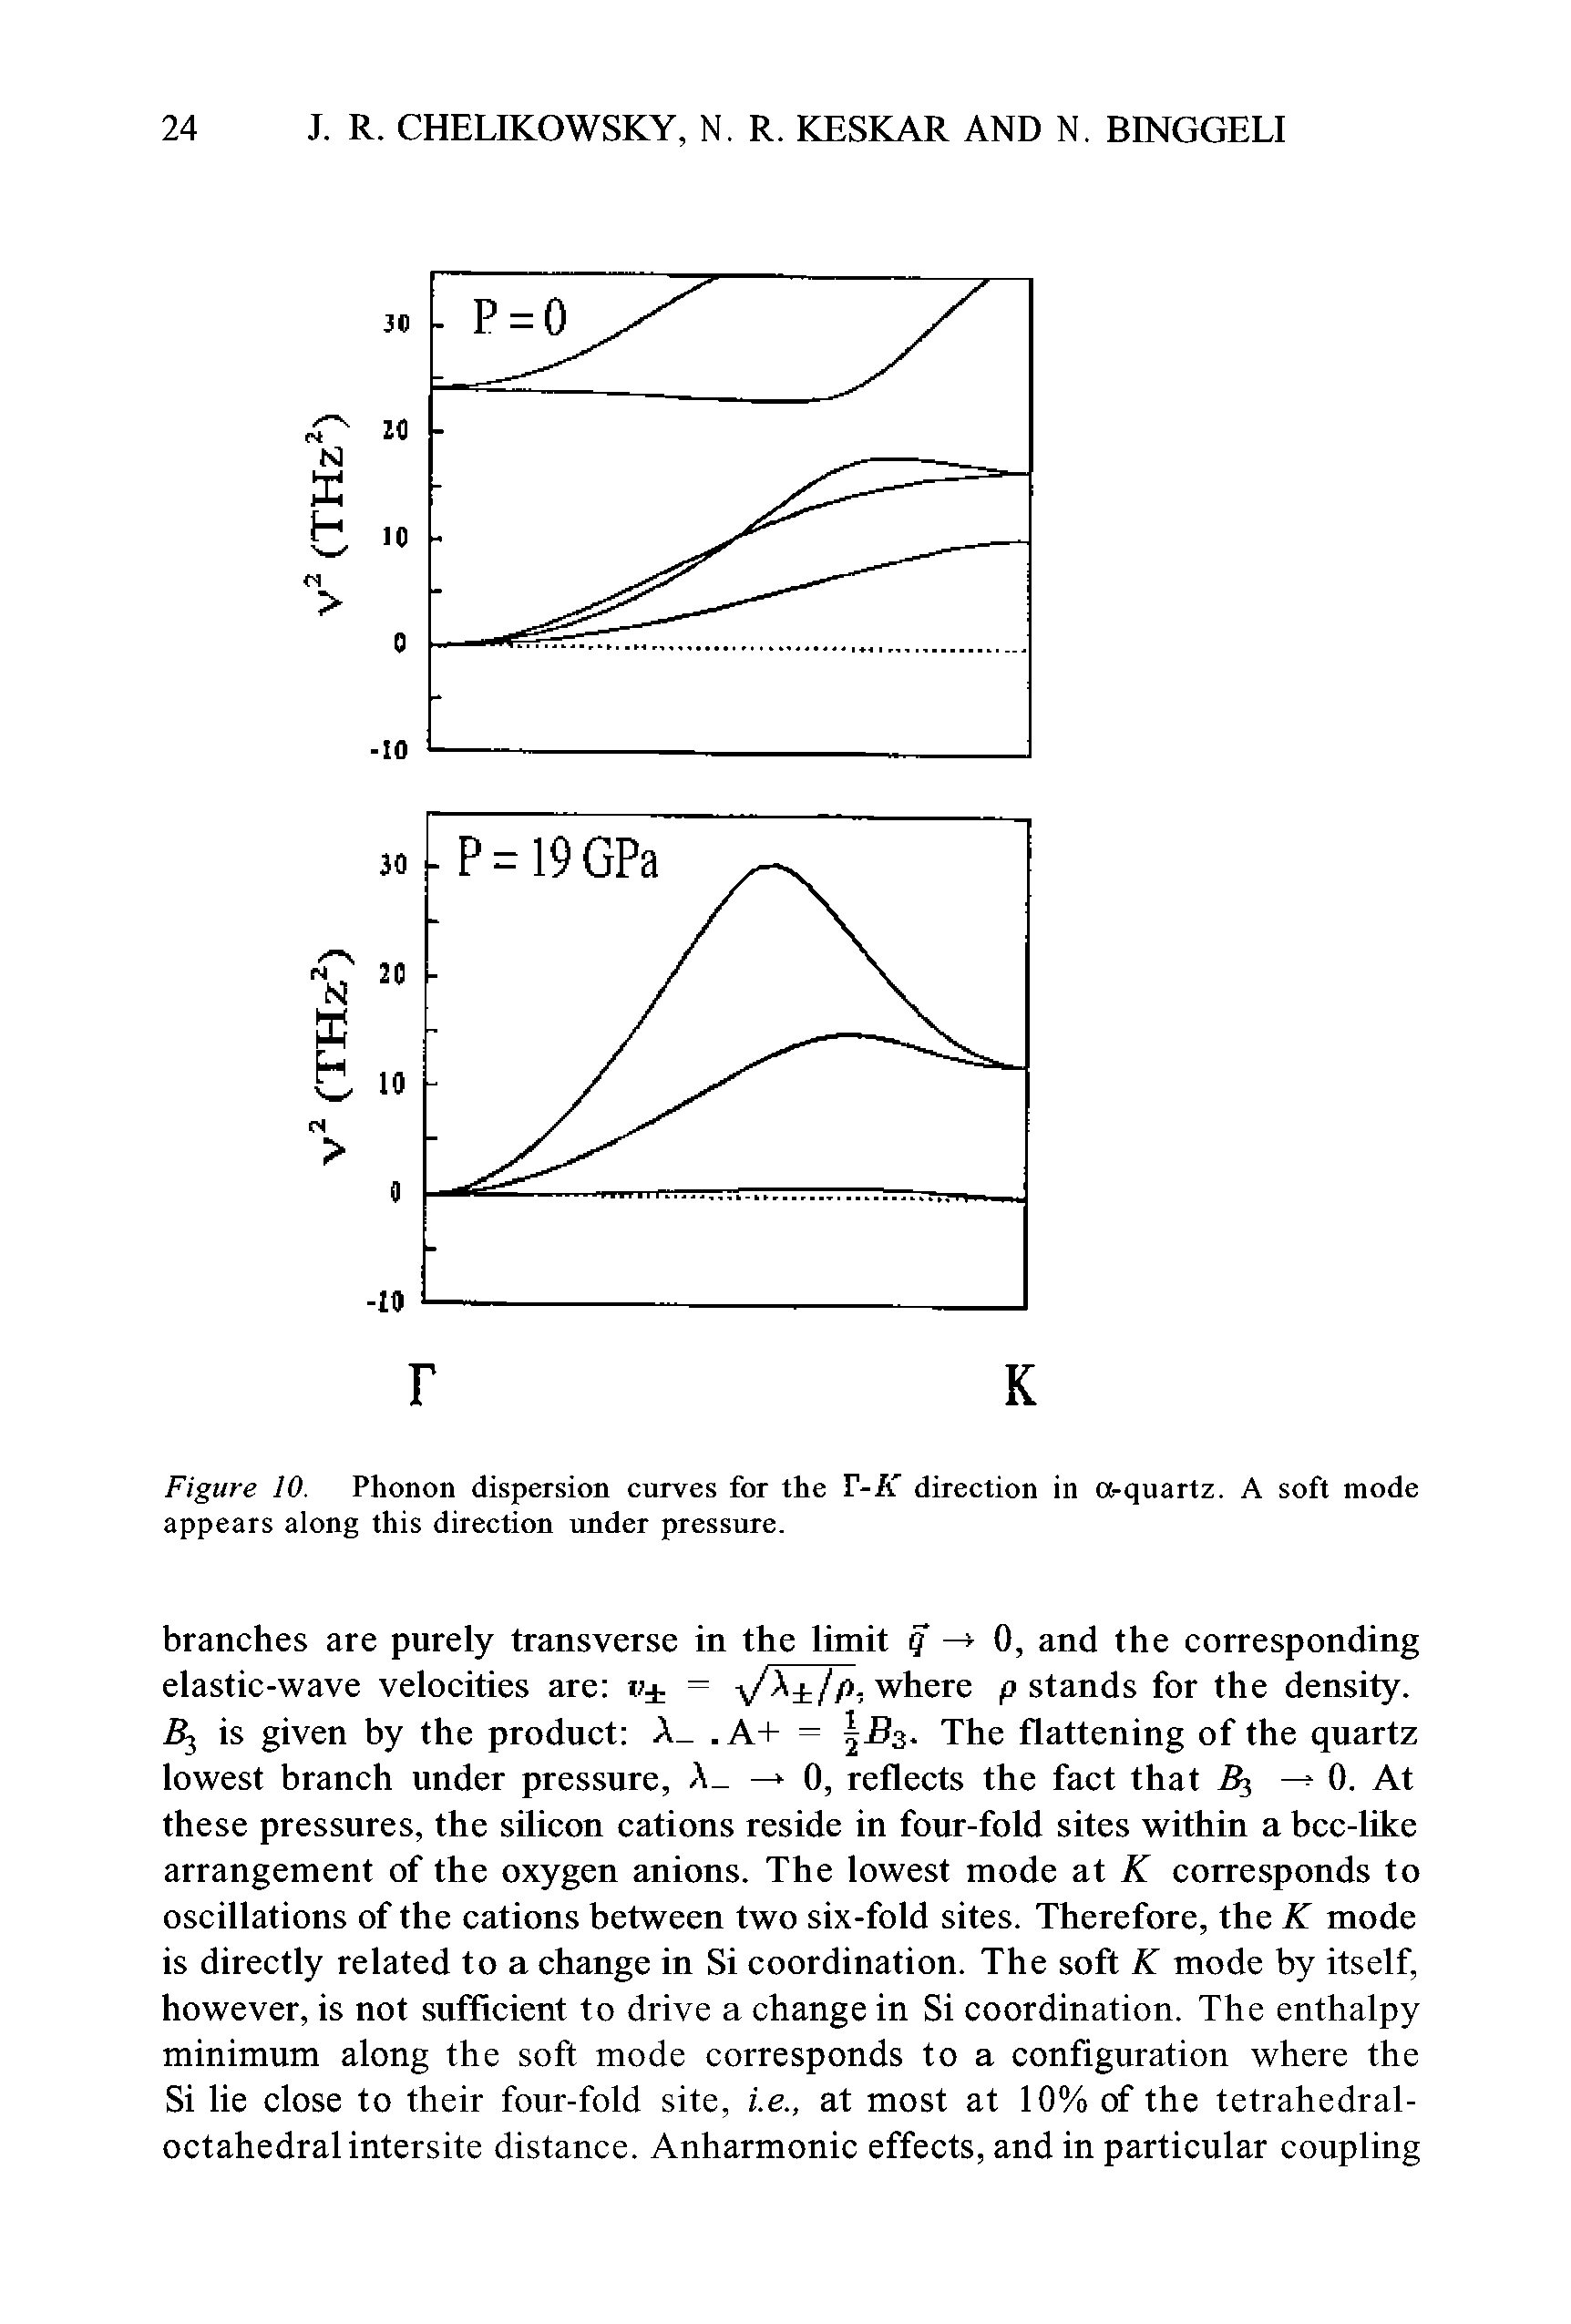 Figure 10. Phonon dispersion curves for the T-K direction in a-quartz. A soft mode appears along this direction under pressure.